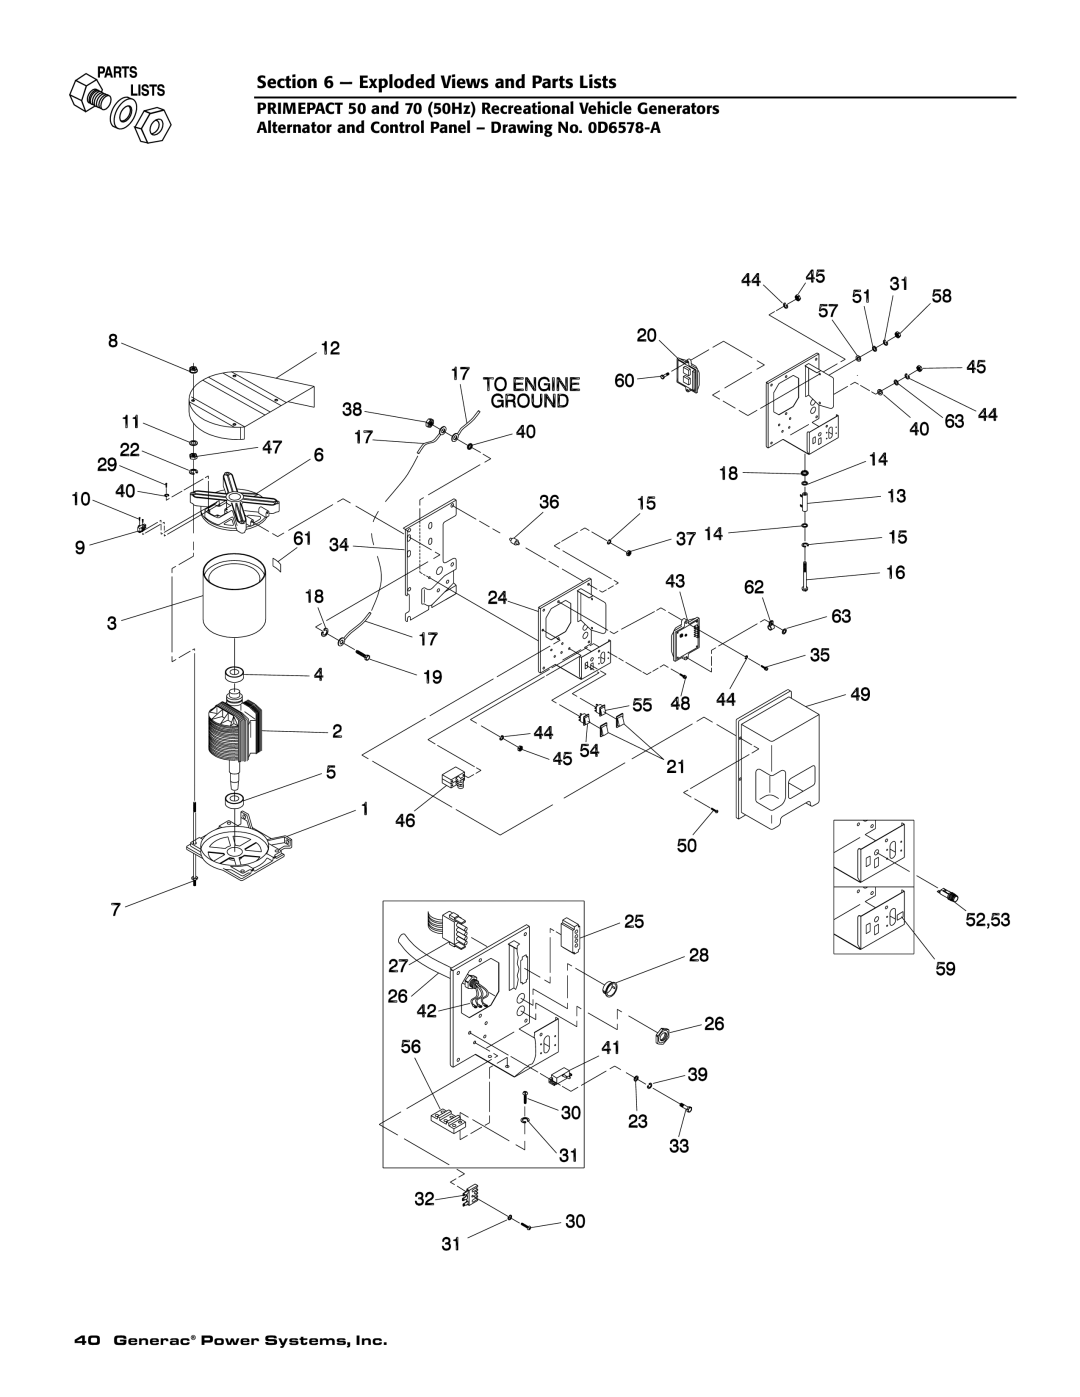 Generac 00784-2, 09290-4 owner manual Exploded Views and Parts Lists, Generac Power Systems, Inc 